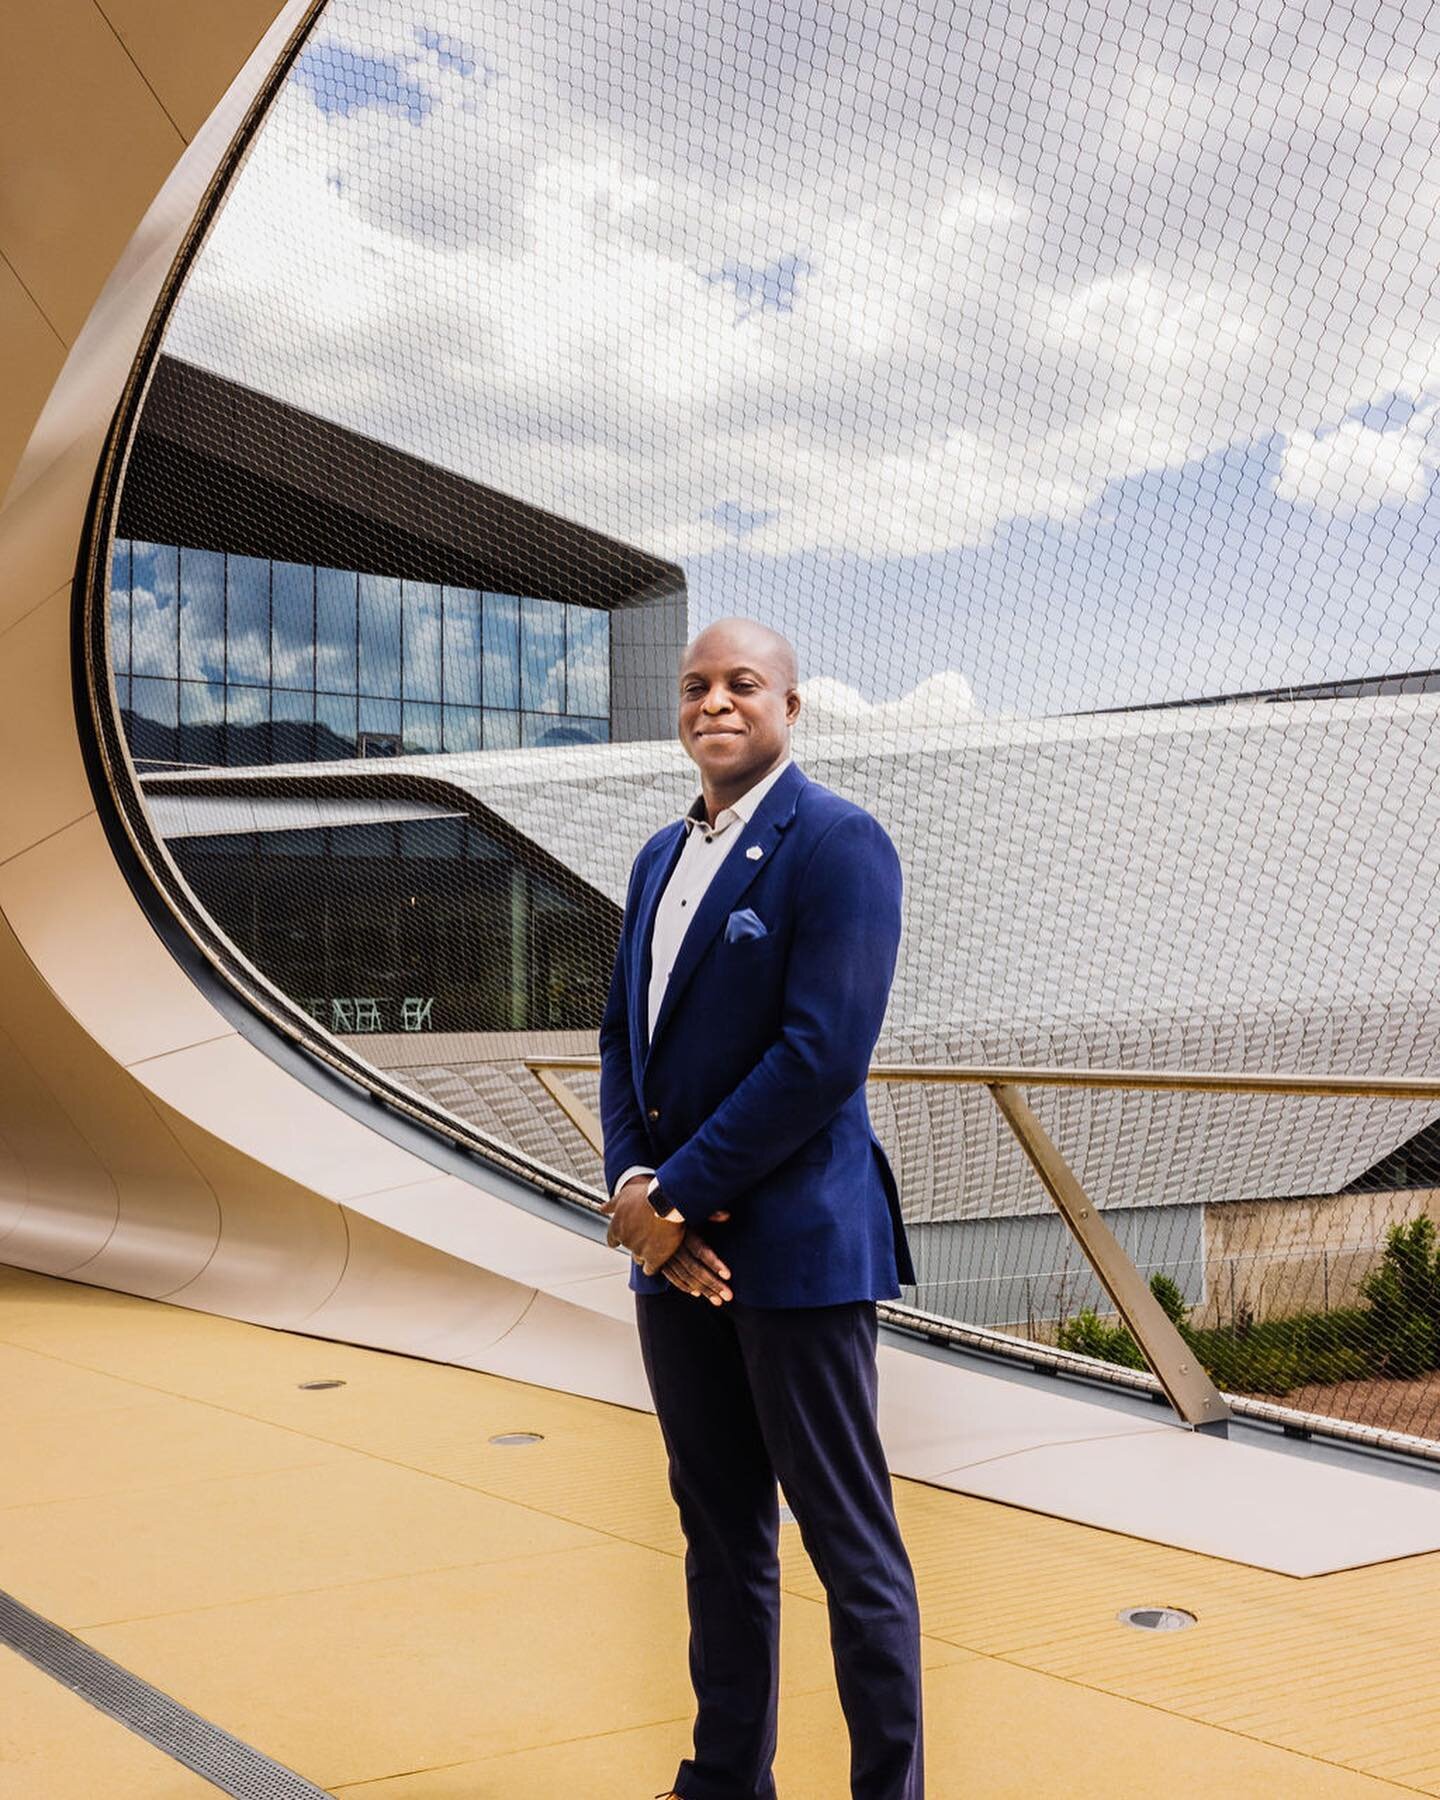 I had the honor of photographing Mayor Mobolade on a bridge for 20 min for @deseretnews. 

Mayor Yemi Mobolade made history in May when he was elected as the first Black immigrant and non-GOP mayor of Colorado Springs, Colorado.

Link in stories for 